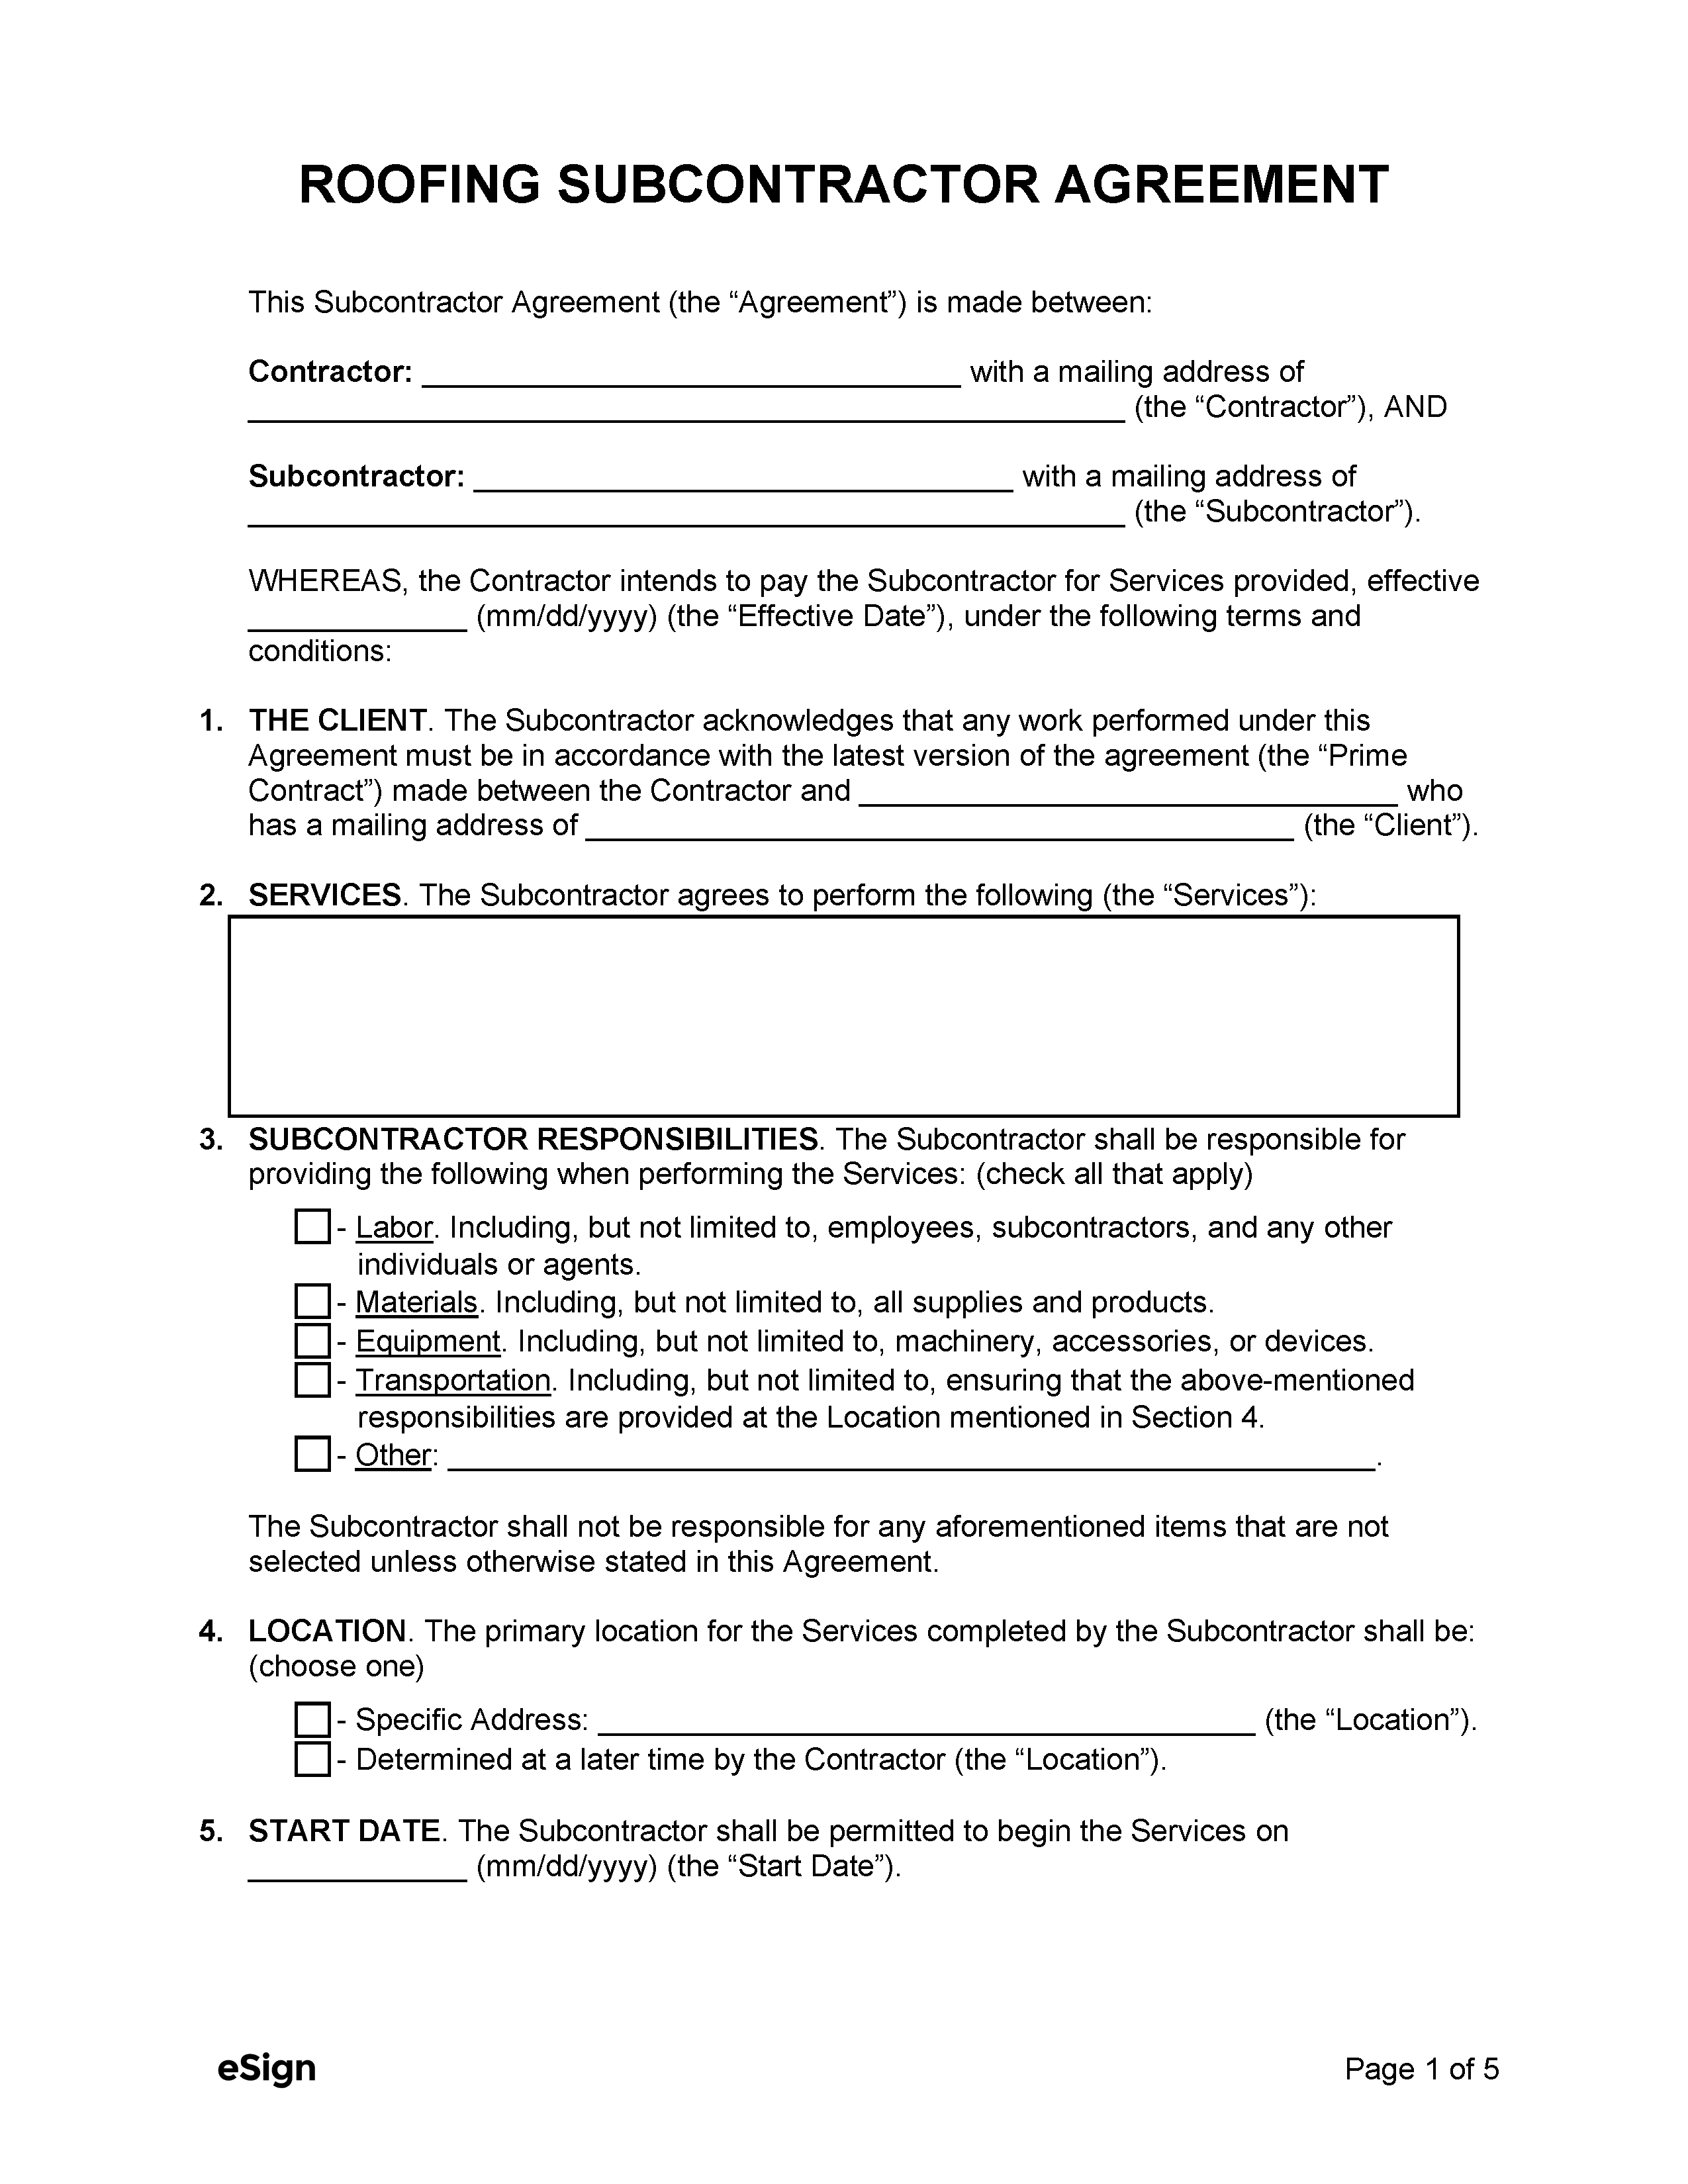 Free Roofing Subcontractor Agreement PDF Word